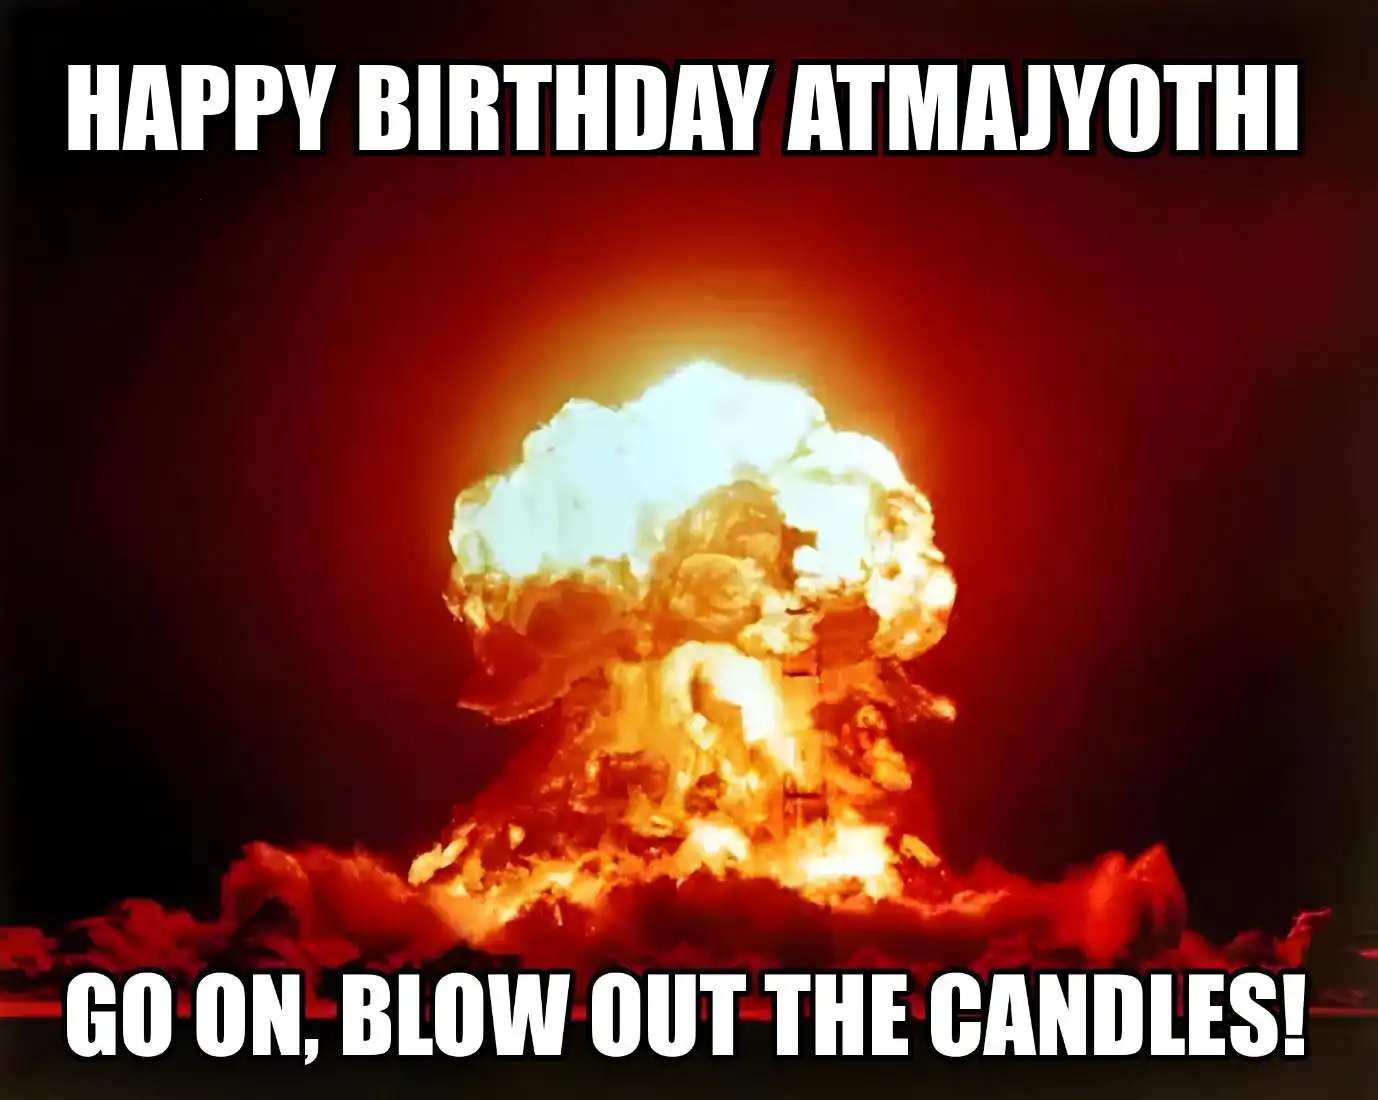 Happy Birthday Atmajyothi Go On Blow Out The Candles Meme